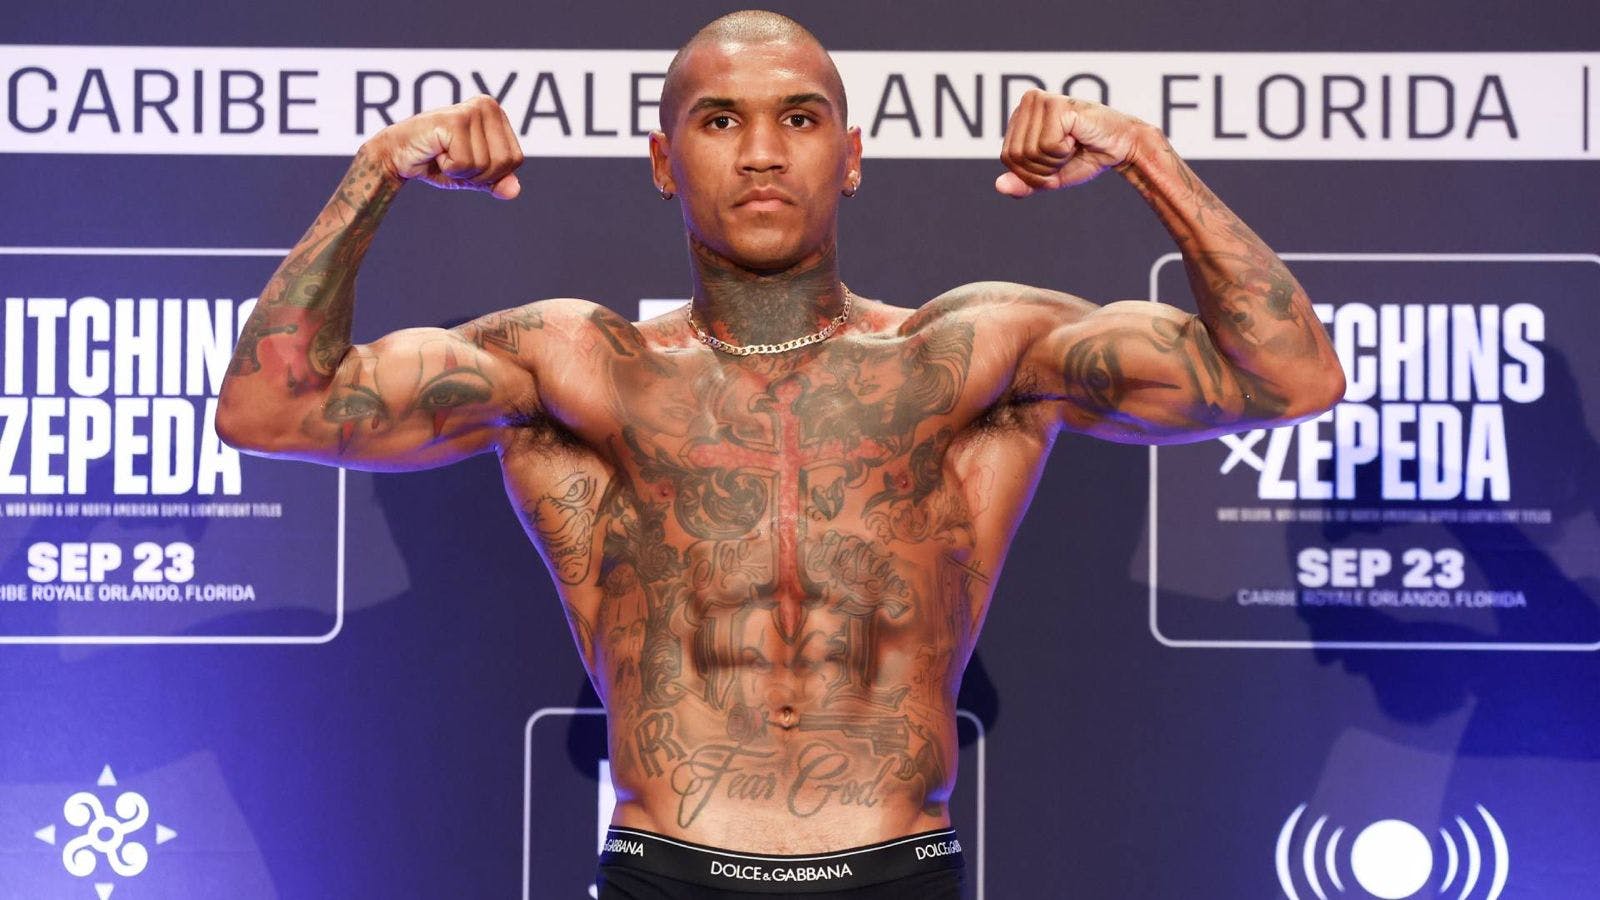 865: BOXING PREVIEW - Conor Benn back on the canvas after Board and UKAD win suspension appeal